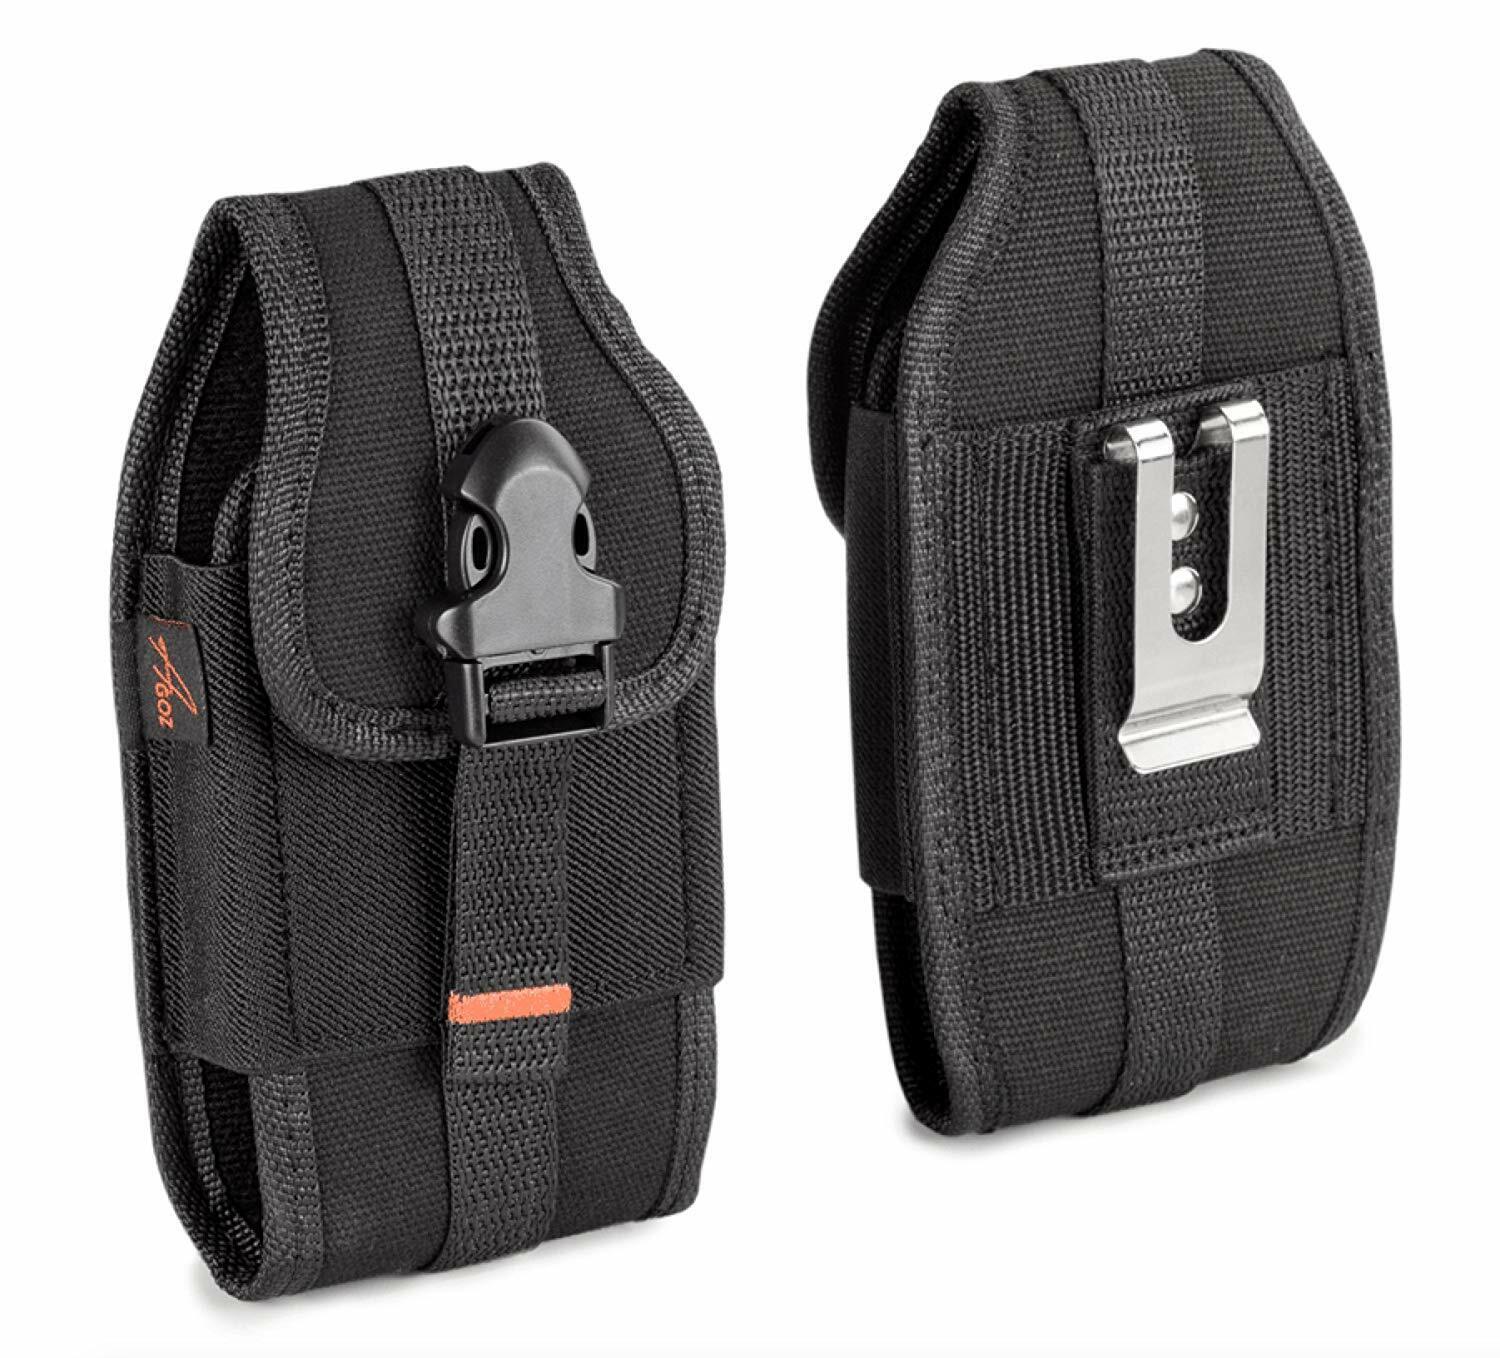 RUGGED Vertical Heavy Duty Canvas Cell Phone Holster Belt Clip Case Pouch Cover